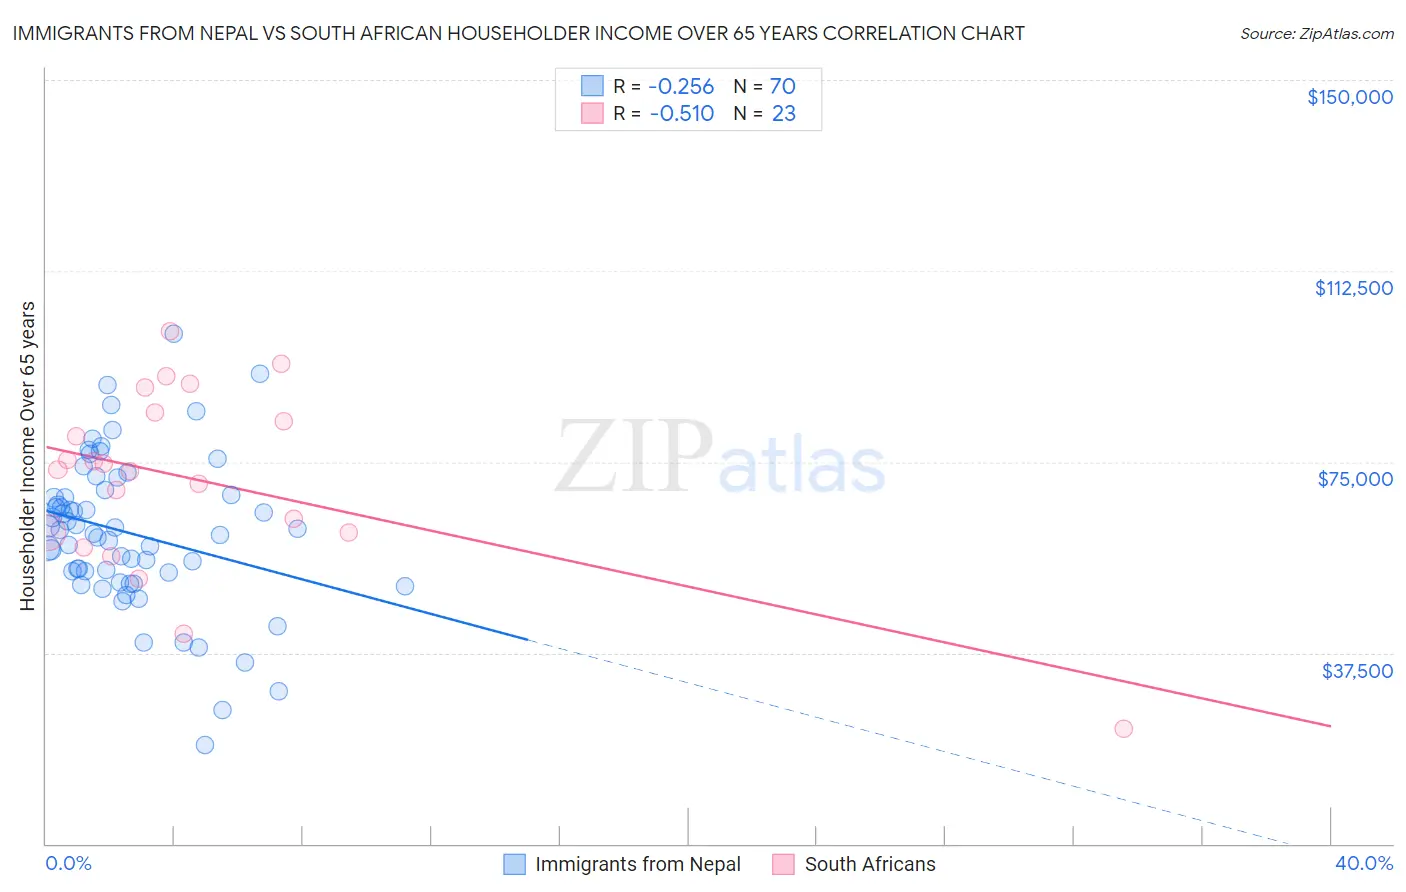 Immigrants from Nepal vs South African Householder Income Over 65 years